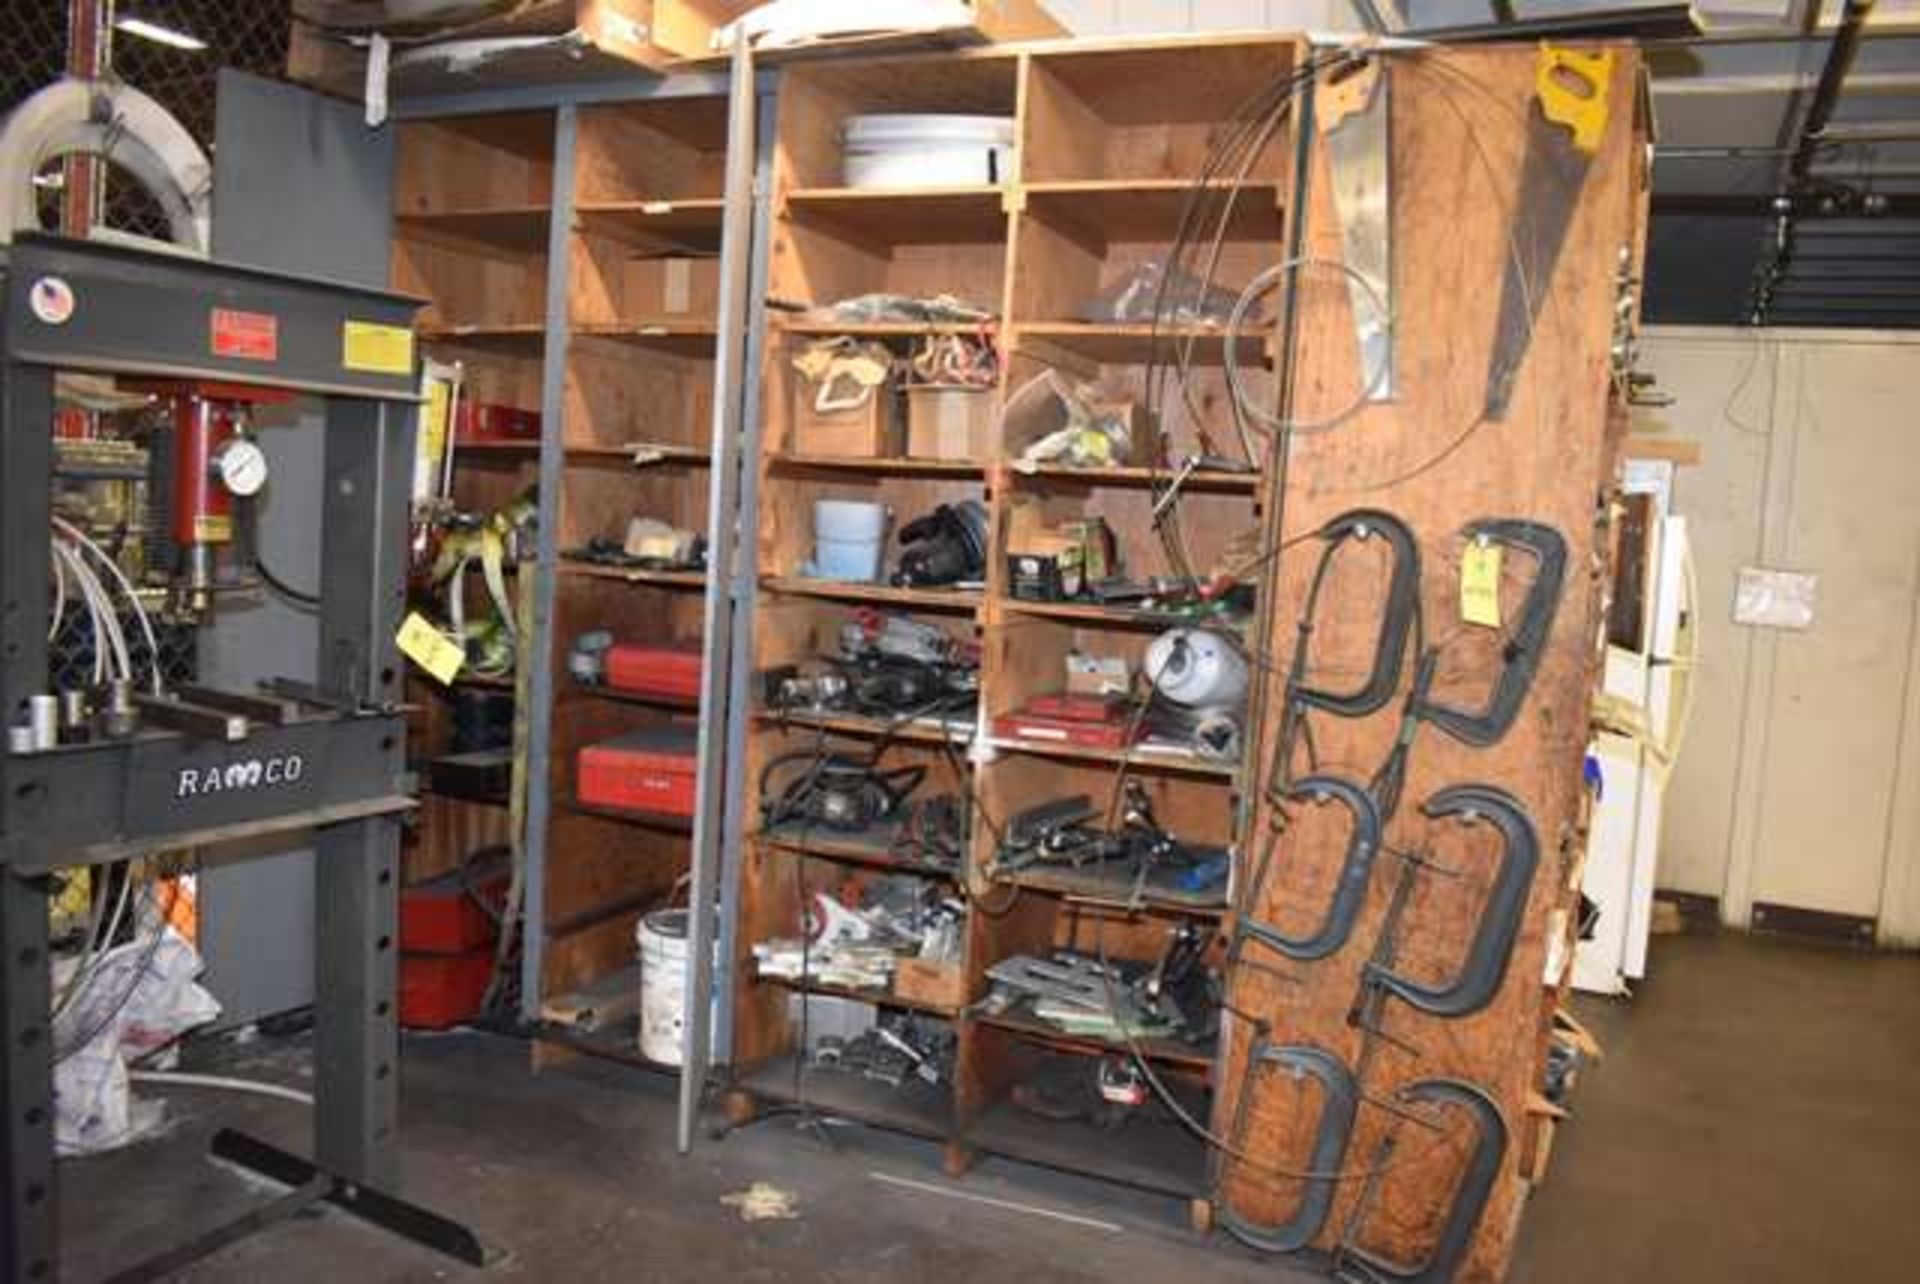 Wooden Shelf Contents - Clamps, Hand Tools, Shop Support - Inspection, RIGGING FEE: $700